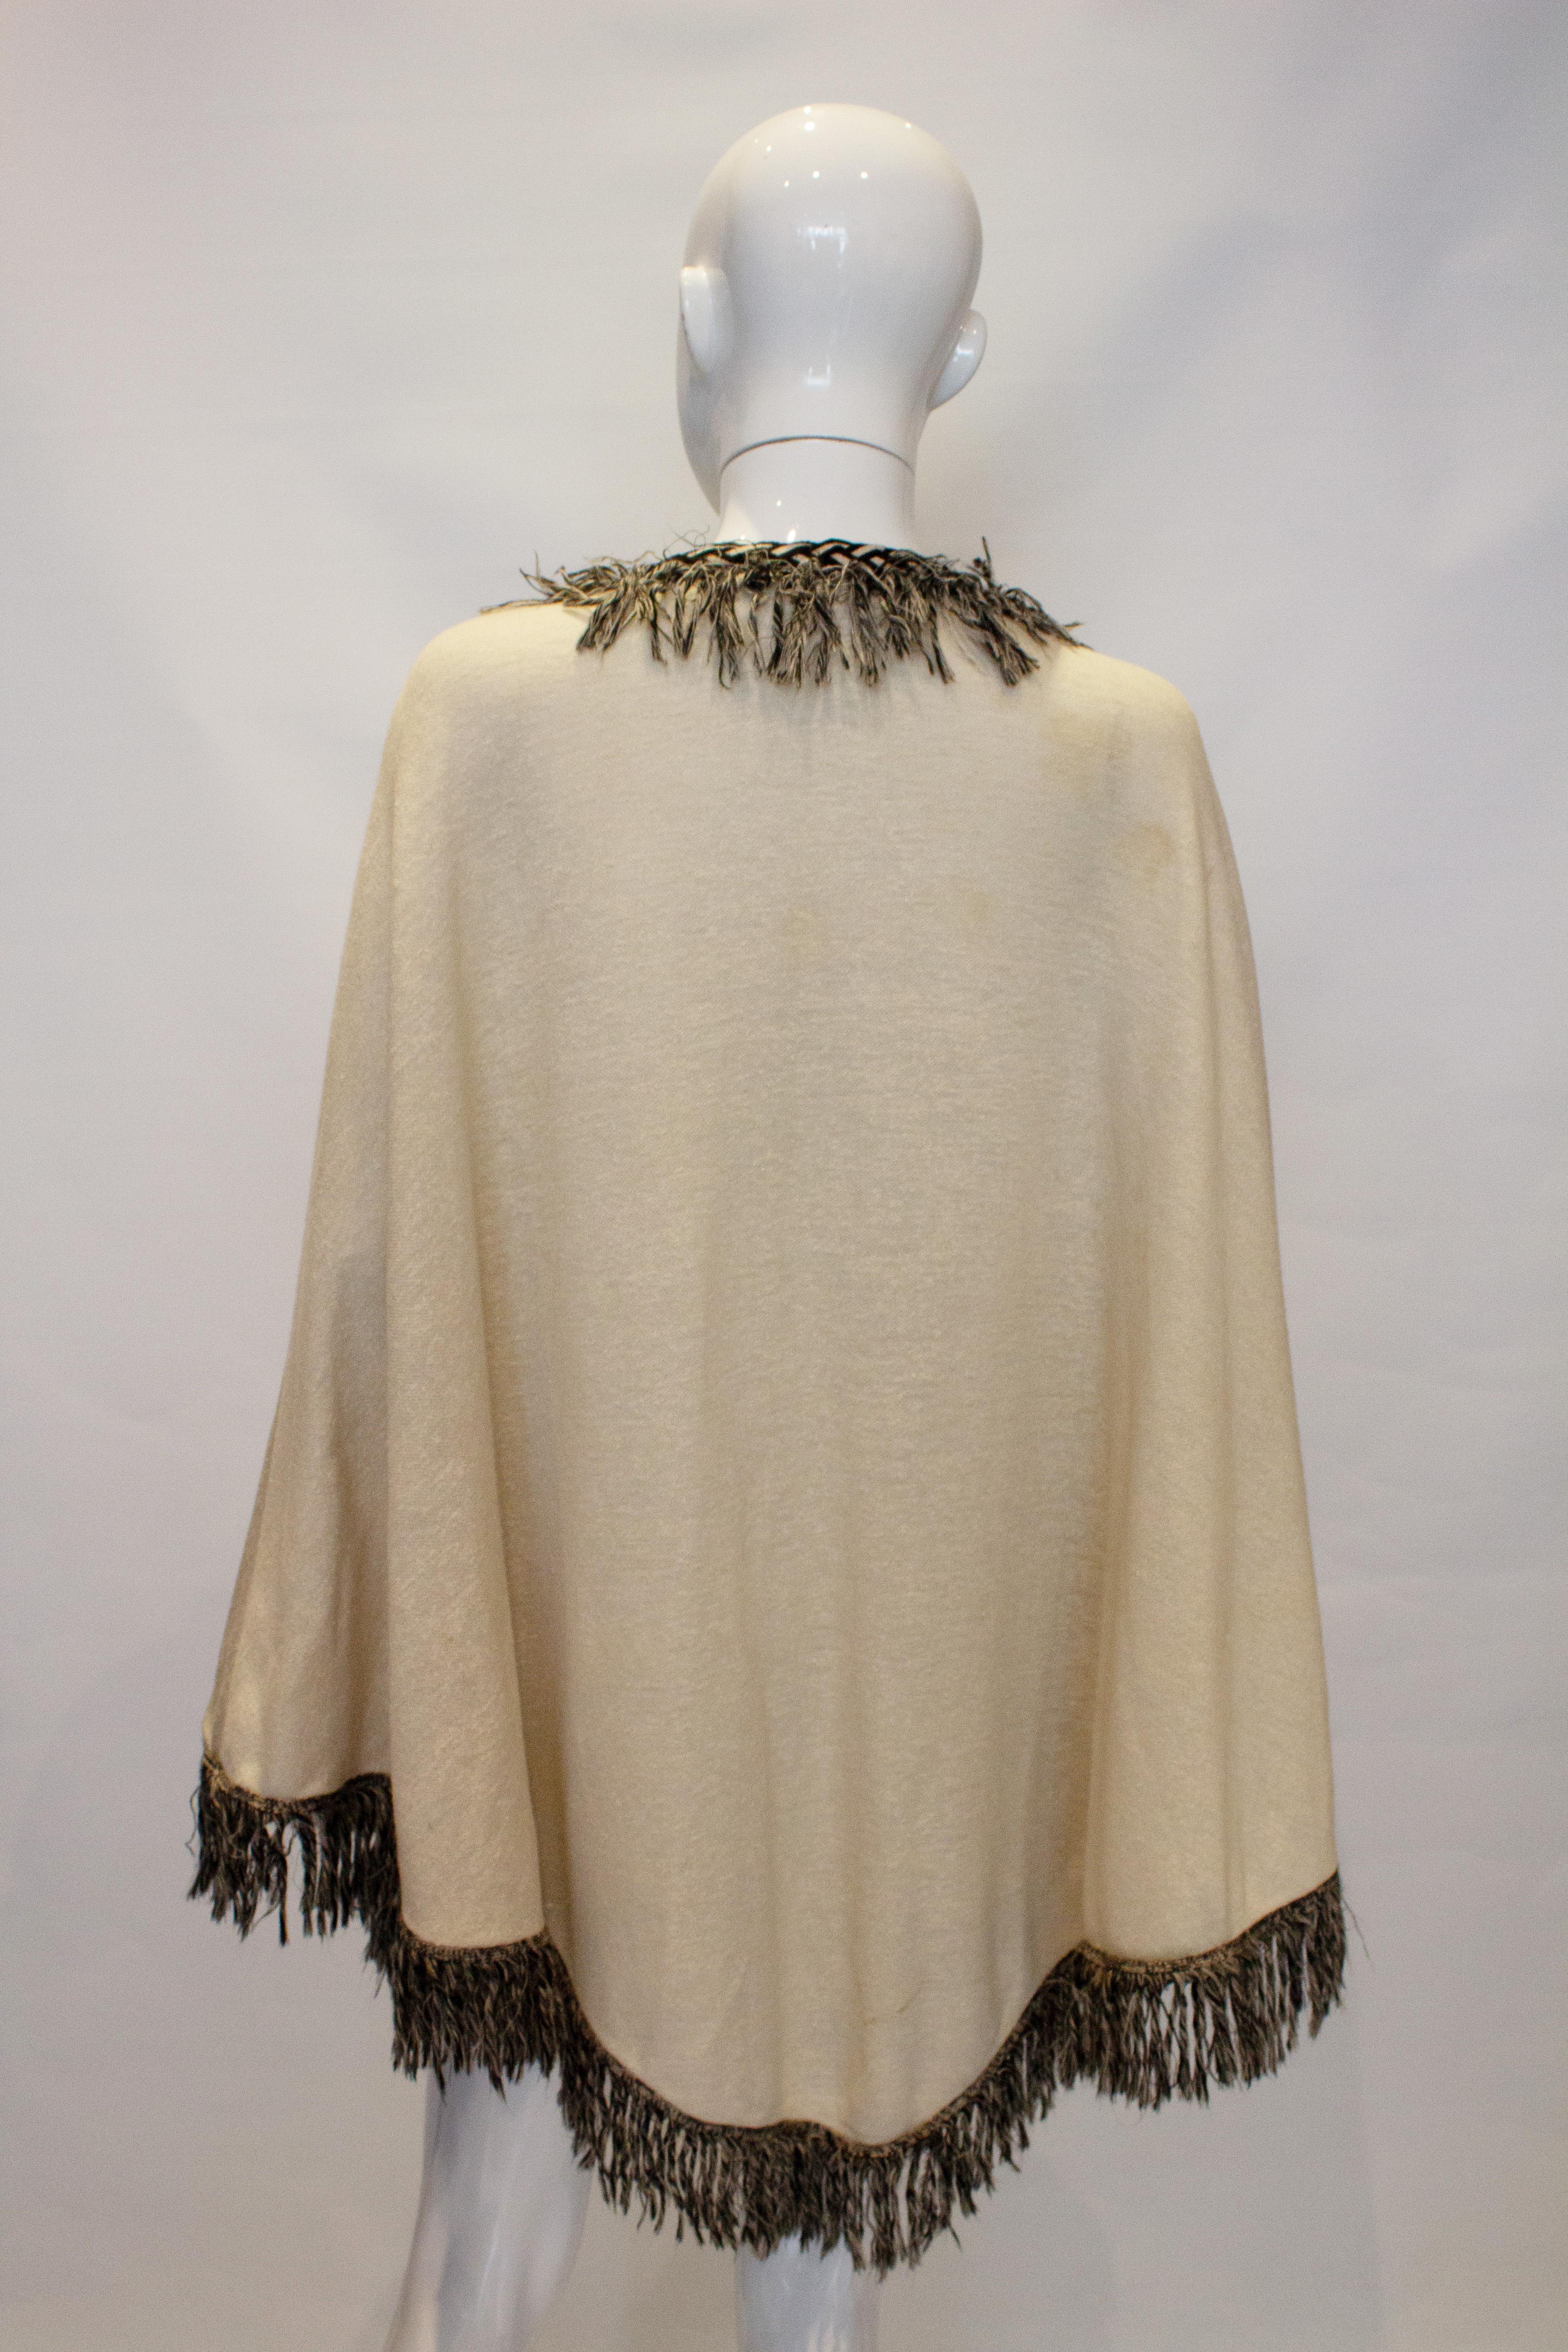 Women's Vintage Ivory and Black Cape by Fierony Paris For Sale